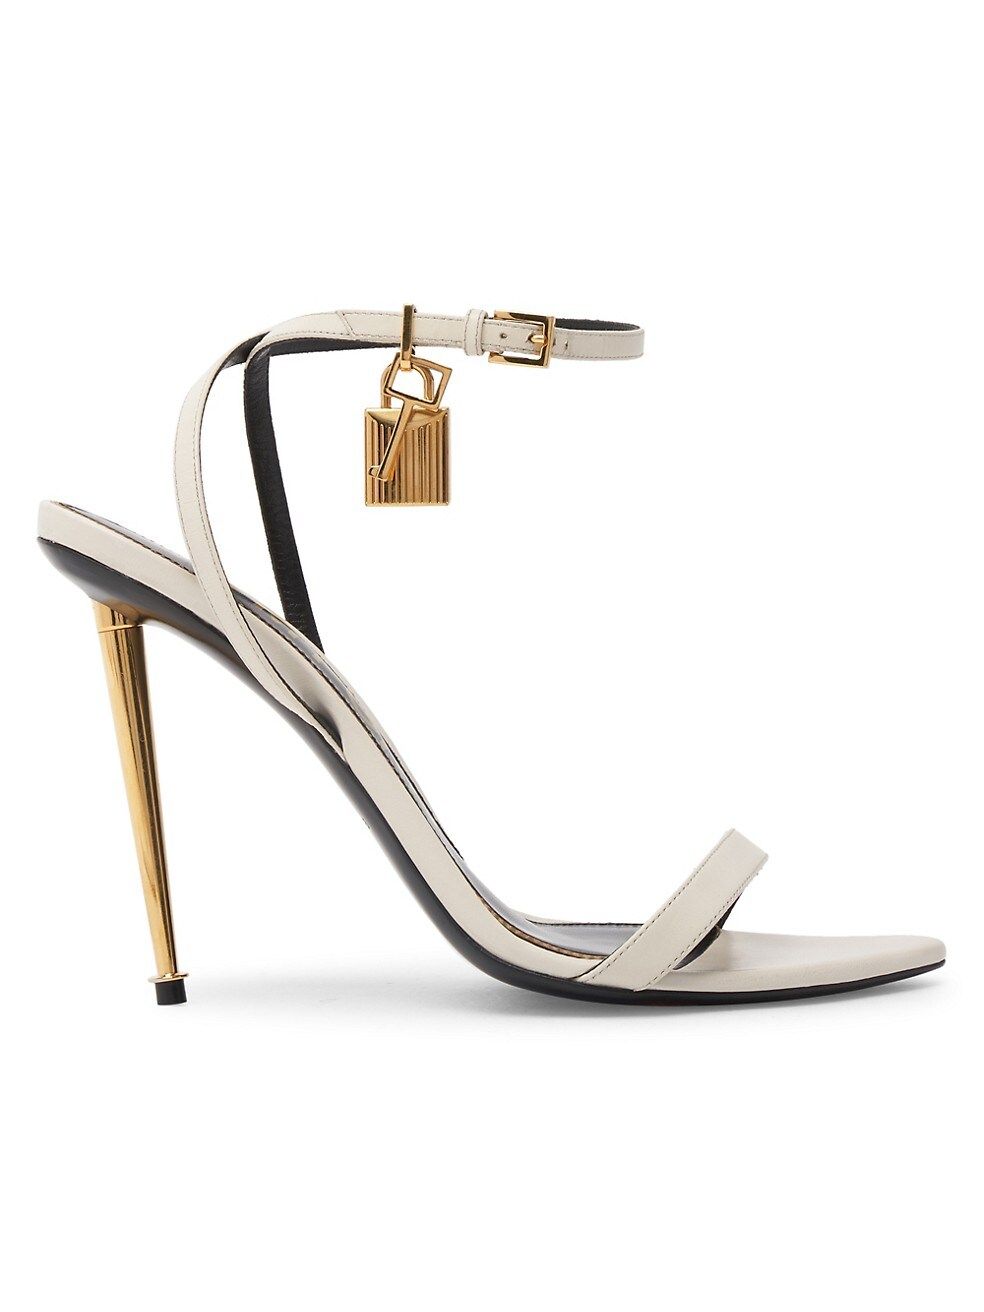 Naked 105 Leather Point-Toe Ankle-Strap Sandals | Saks Fifth Avenue